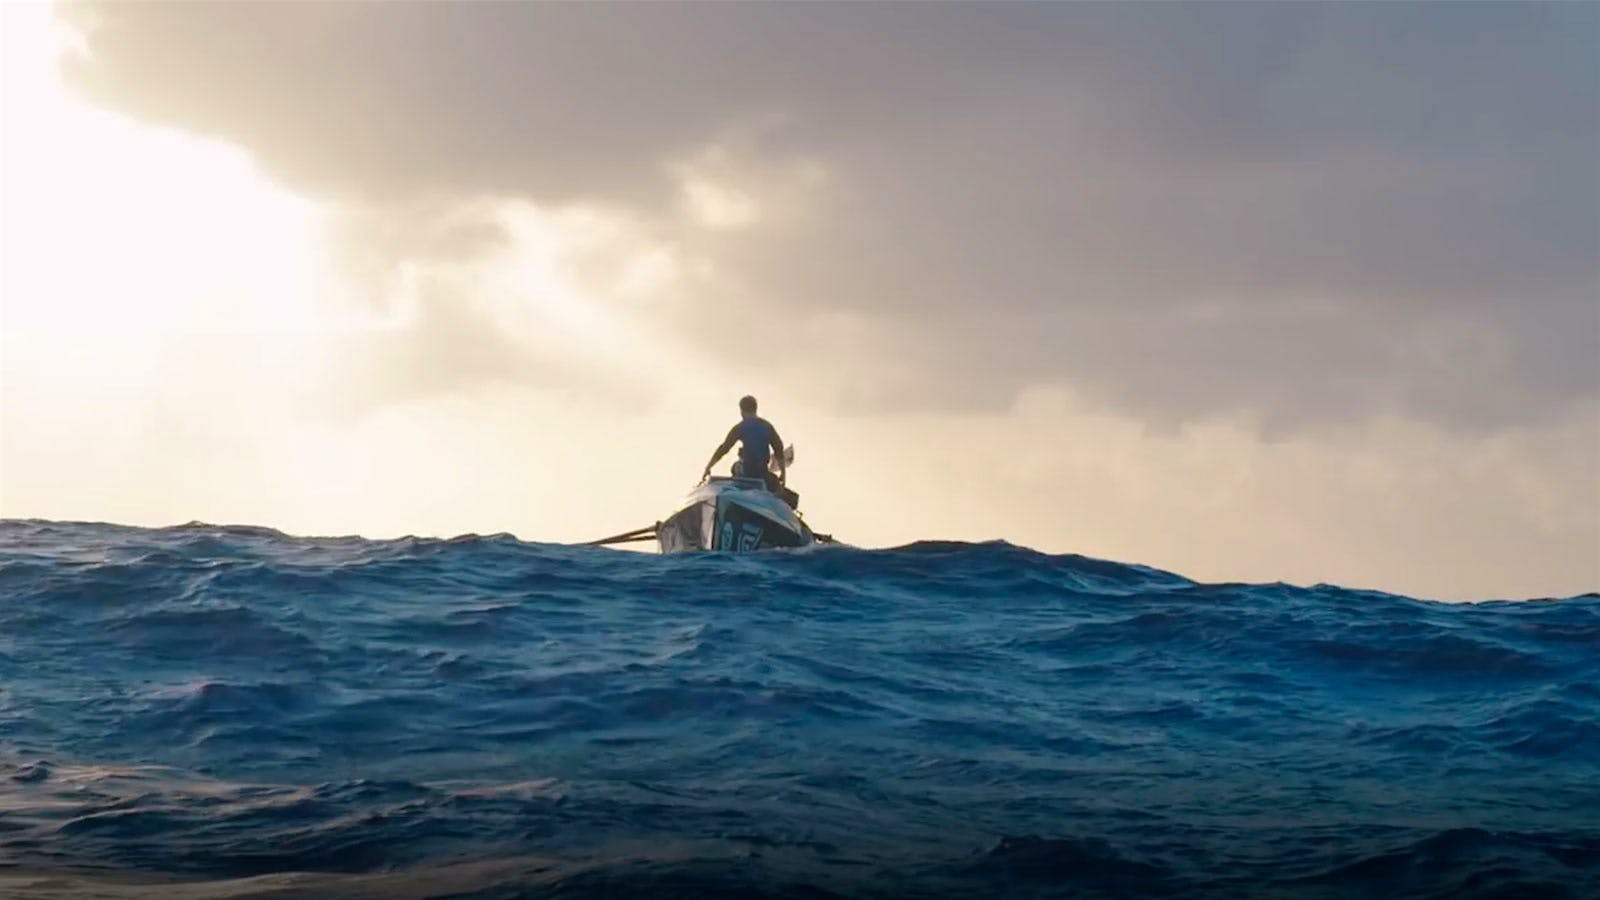 Extreme Winemaker Rowing 3,000 Miles Solo Across the Atlantic Right Now